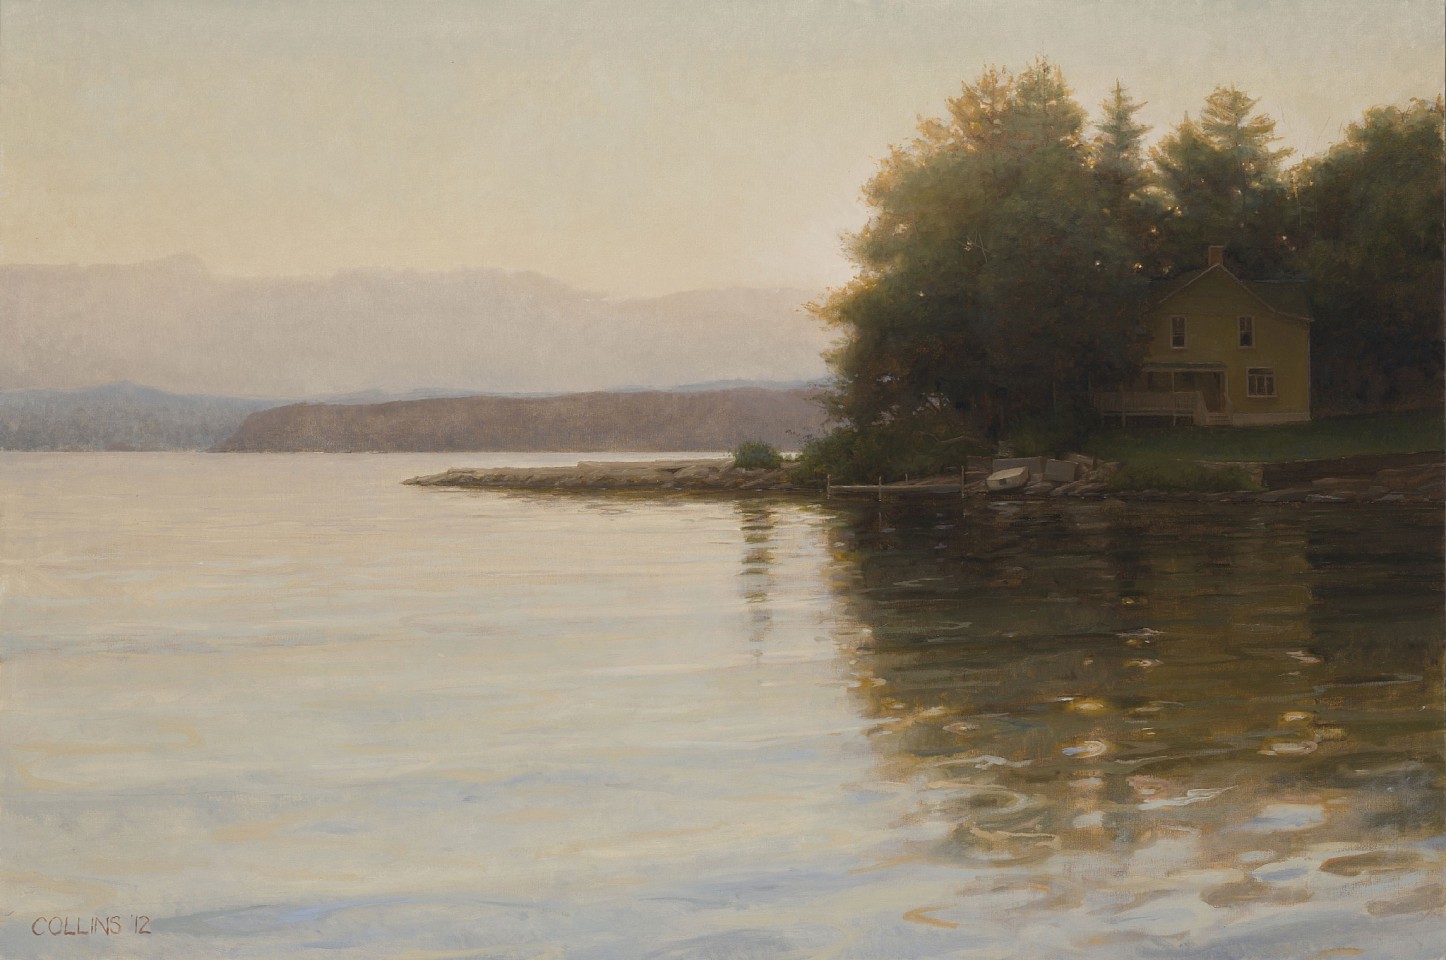 Jacob Collins, Yellow House on Thompson's Point at Twilight, 2012
oil on canvas, 28 x 42 in. (71.1 x 106.7 cm)
AG7774